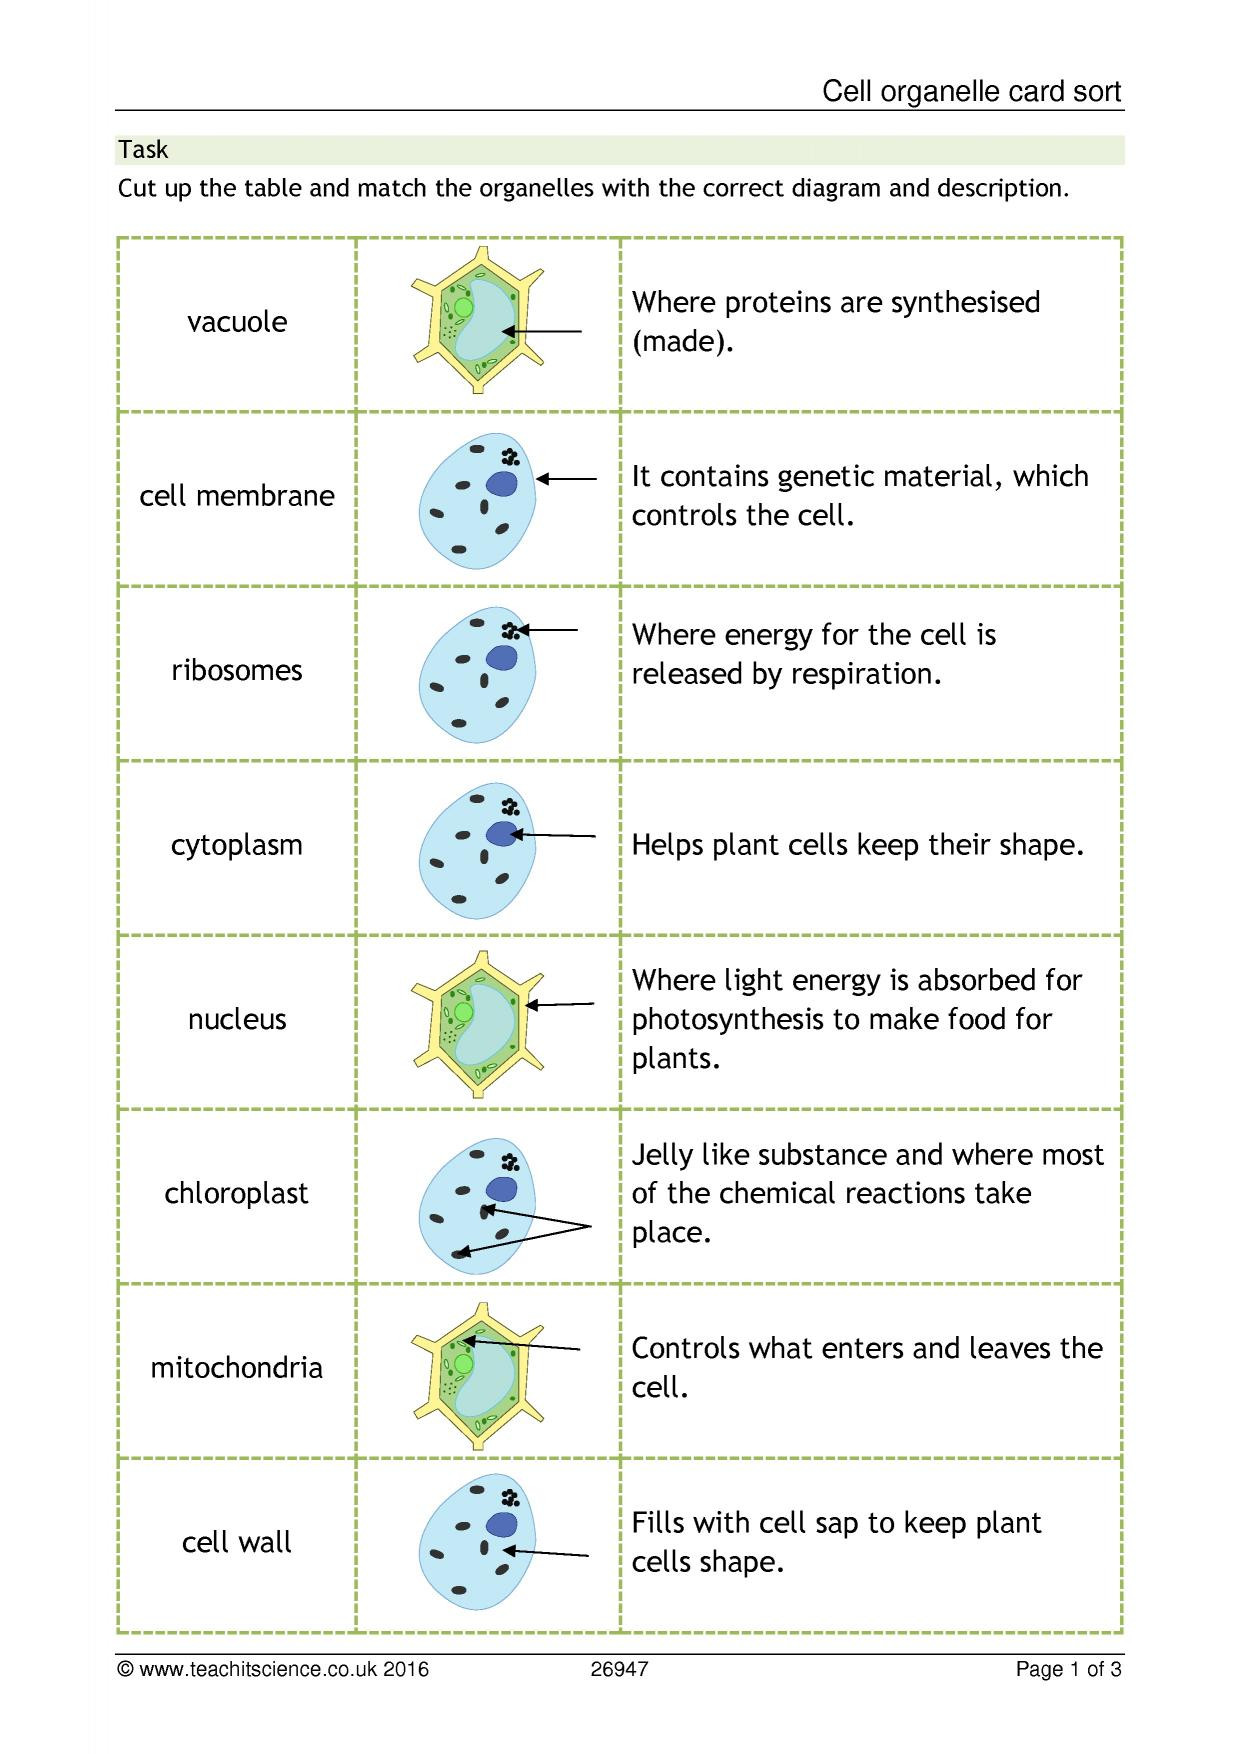 Cell organelles Worksheet Answers Cell organelle Card sort